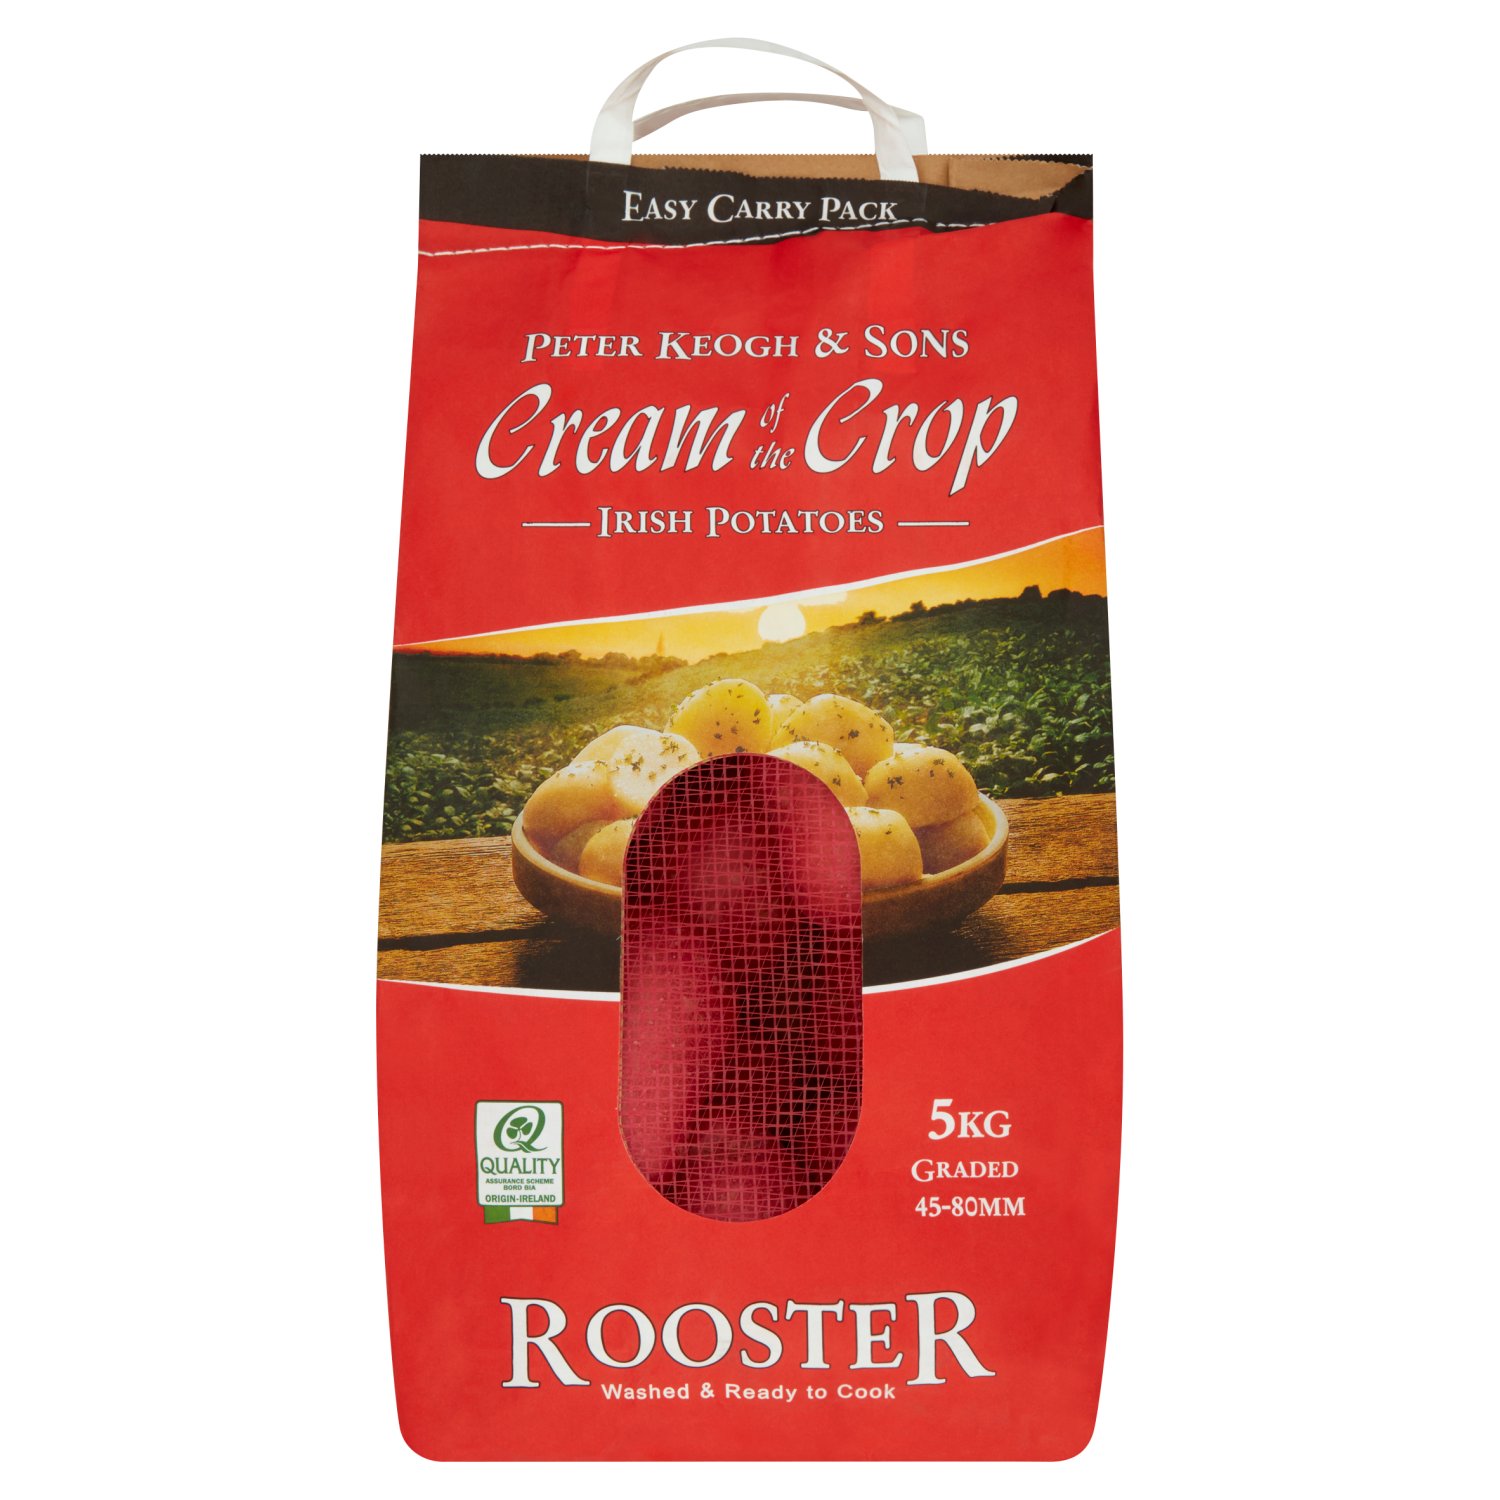 We are delighted to share our Rooster Potatoes with you today and hope you enjoy their light fluffy texture and unique delicious taste... a Keogh family favourite!

Cook with Love
Rooster is the Nation's favourite potato, with its deep red skin and light floury texture. It is an extremely versatile potato, and it is suitable for all potato dishes.